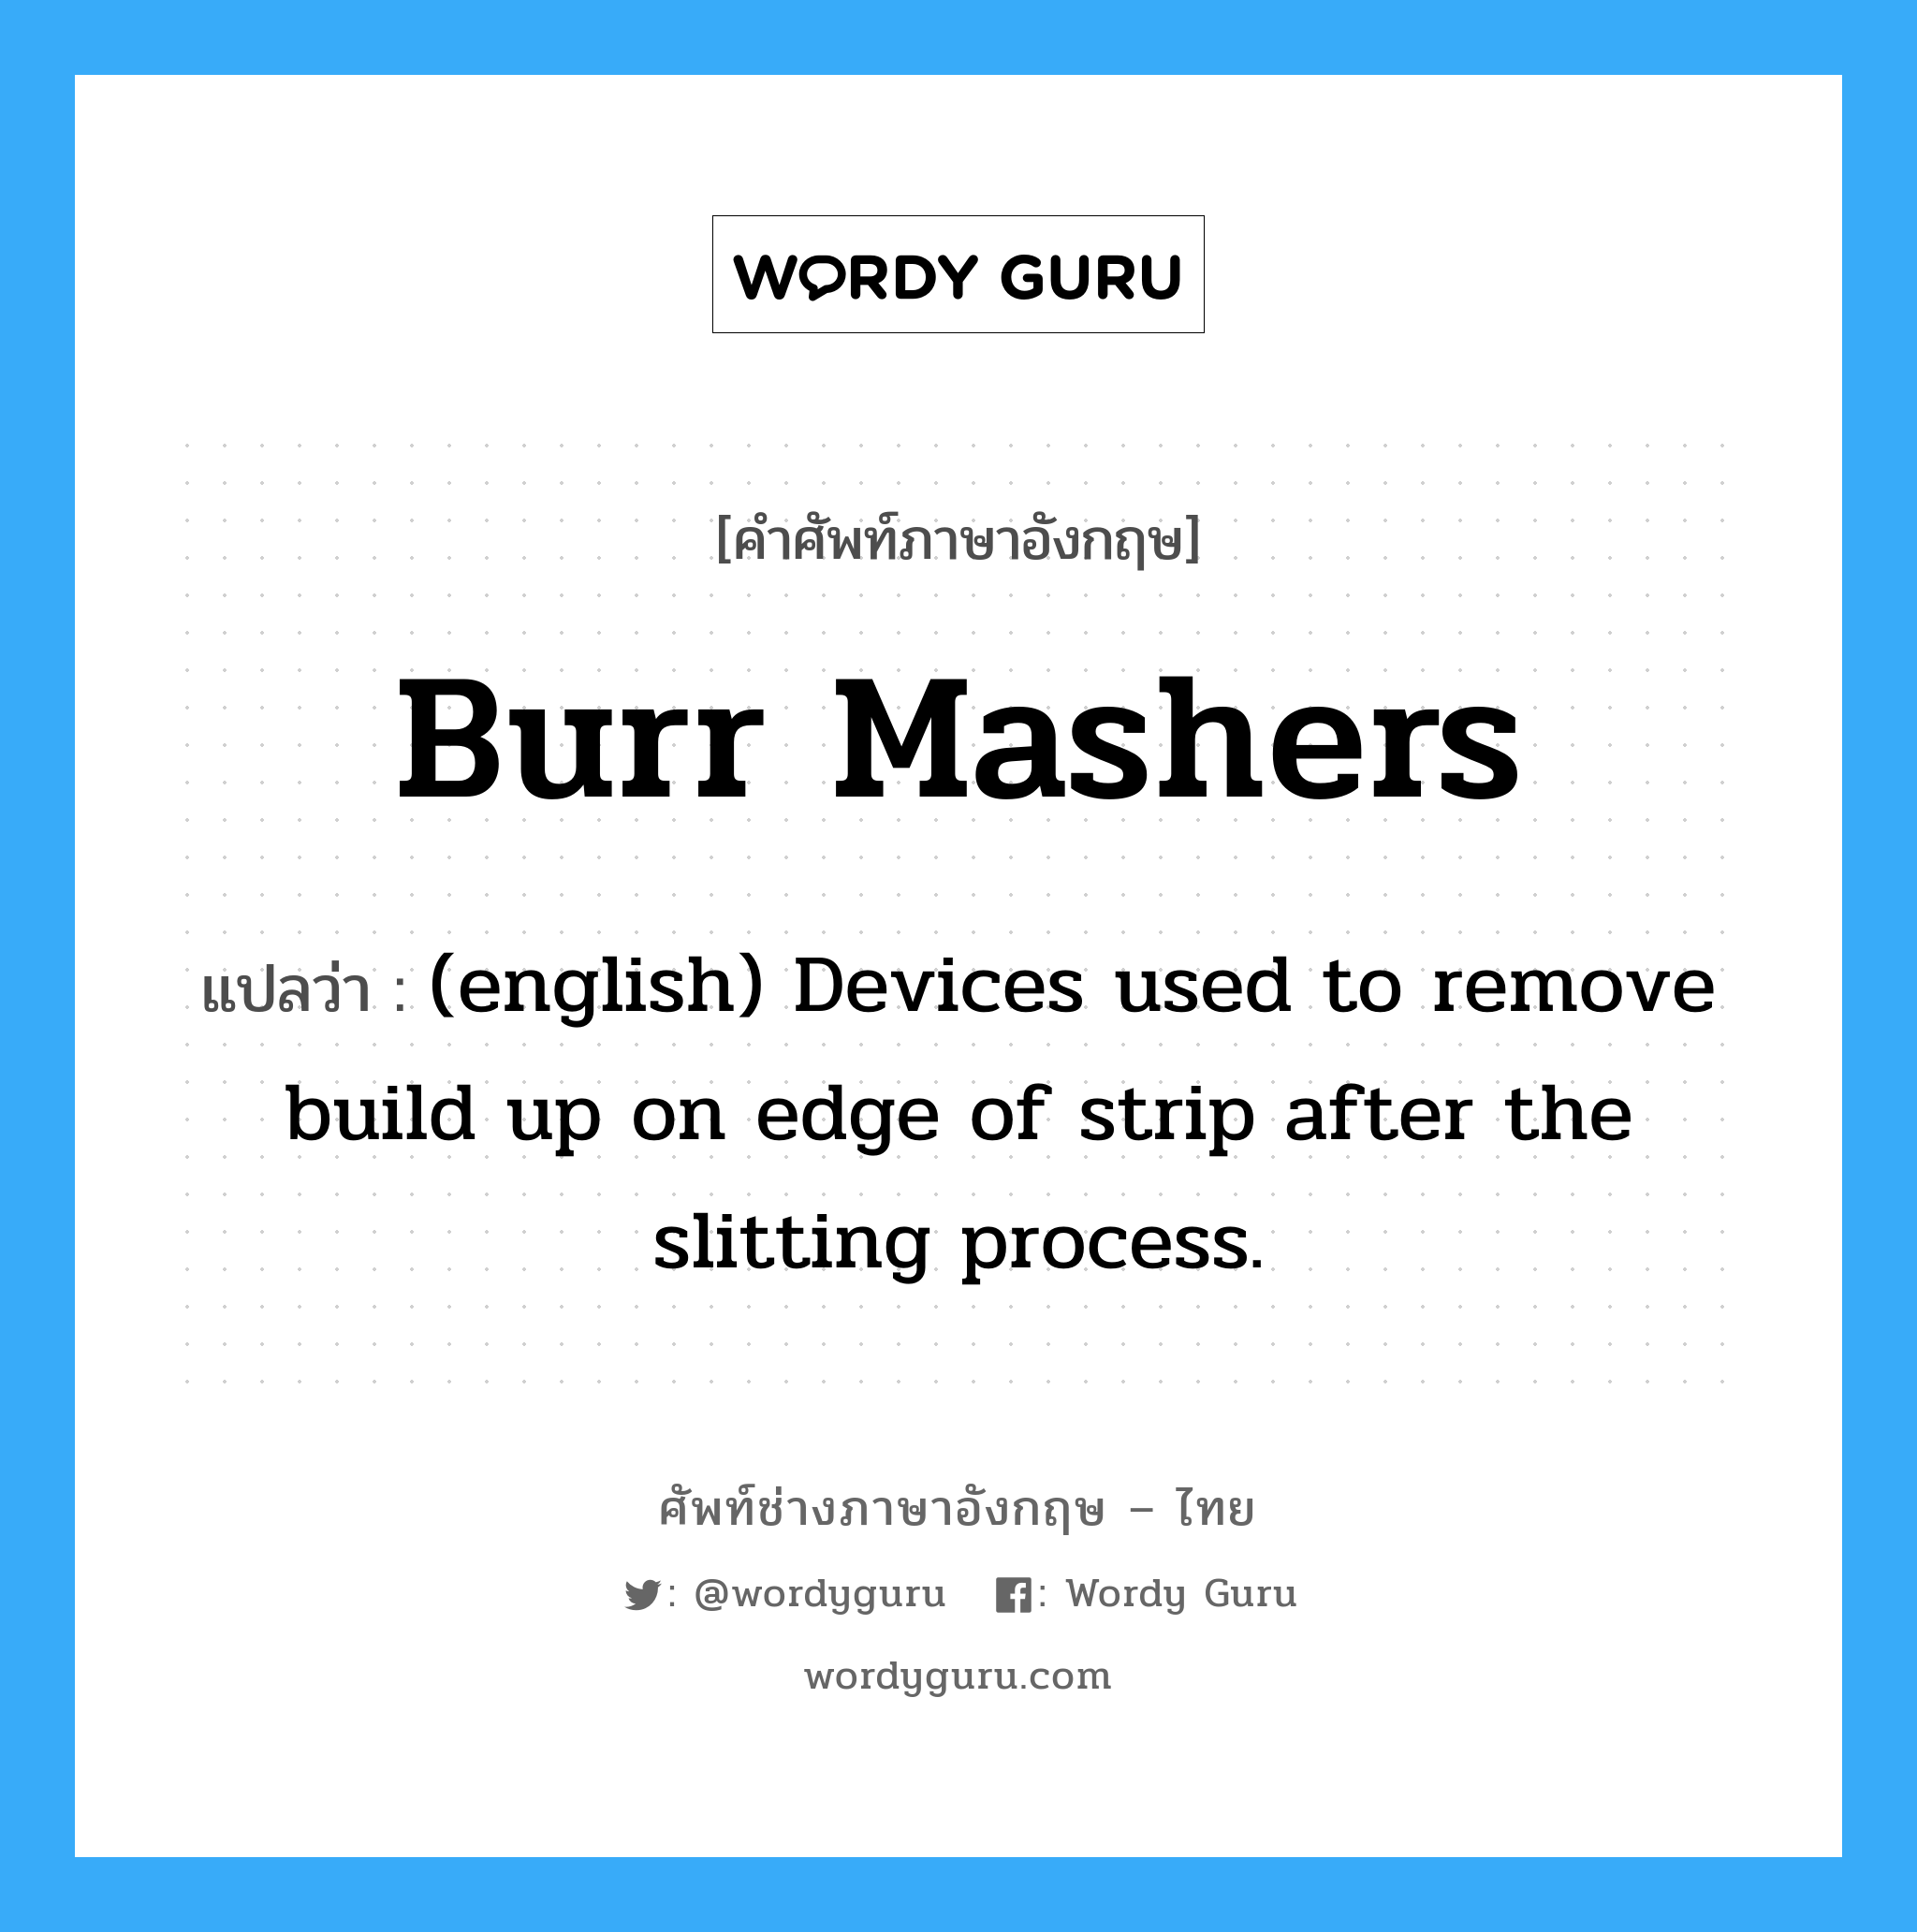 Burr Mashers แปลว่า?, คำศัพท์ช่างภาษาอังกฤษ - ไทย Burr Mashers คำศัพท์ภาษาอังกฤษ Burr Mashers แปลว่า (english) Devices used to remove build up on edge of strip after the slitting process.